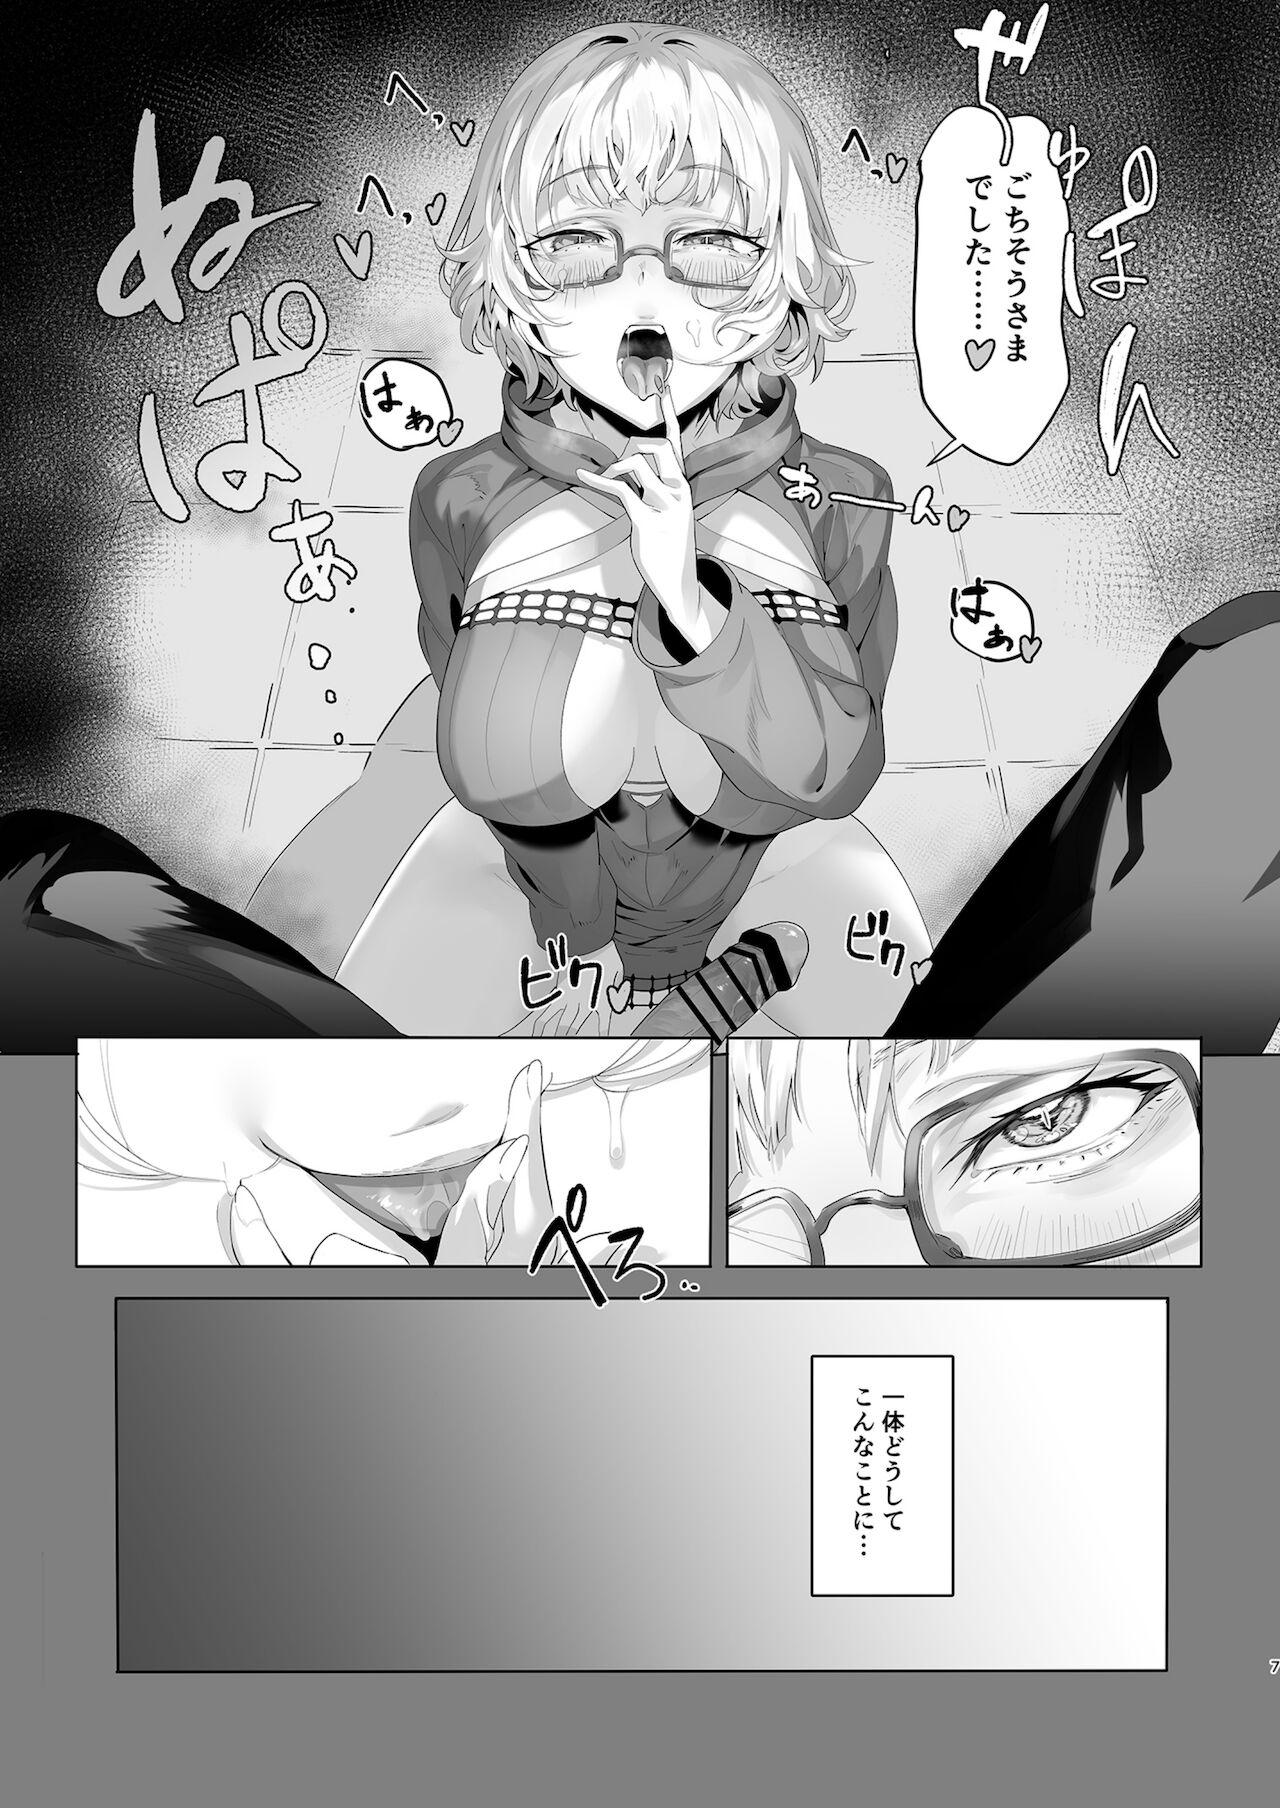 Mexican Madness - Fate grand order Wrestling - Page 6